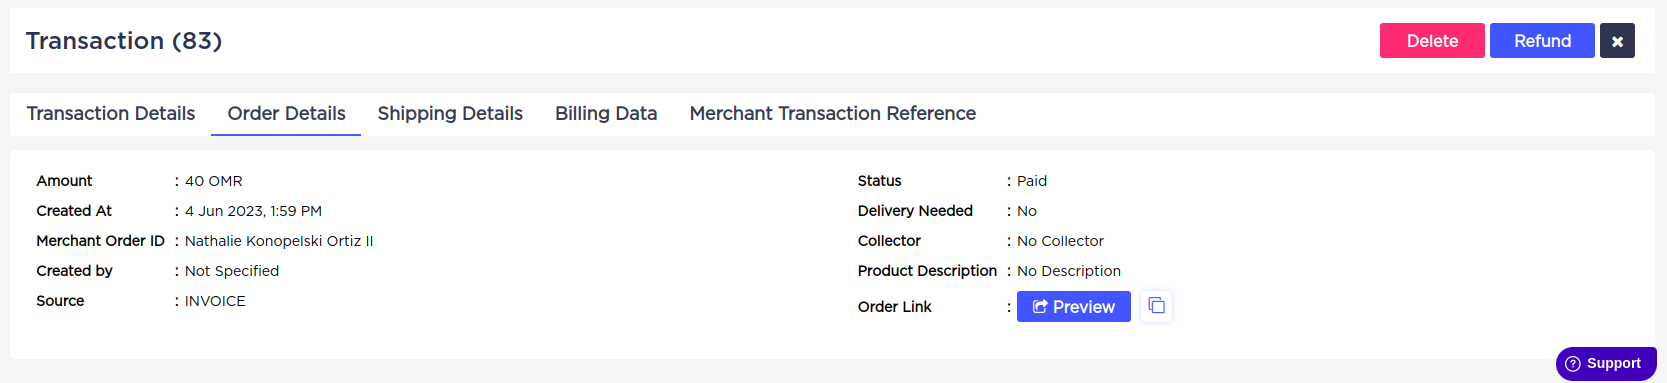 Accept Dashboard - Transactions Tab - Related Order Details.